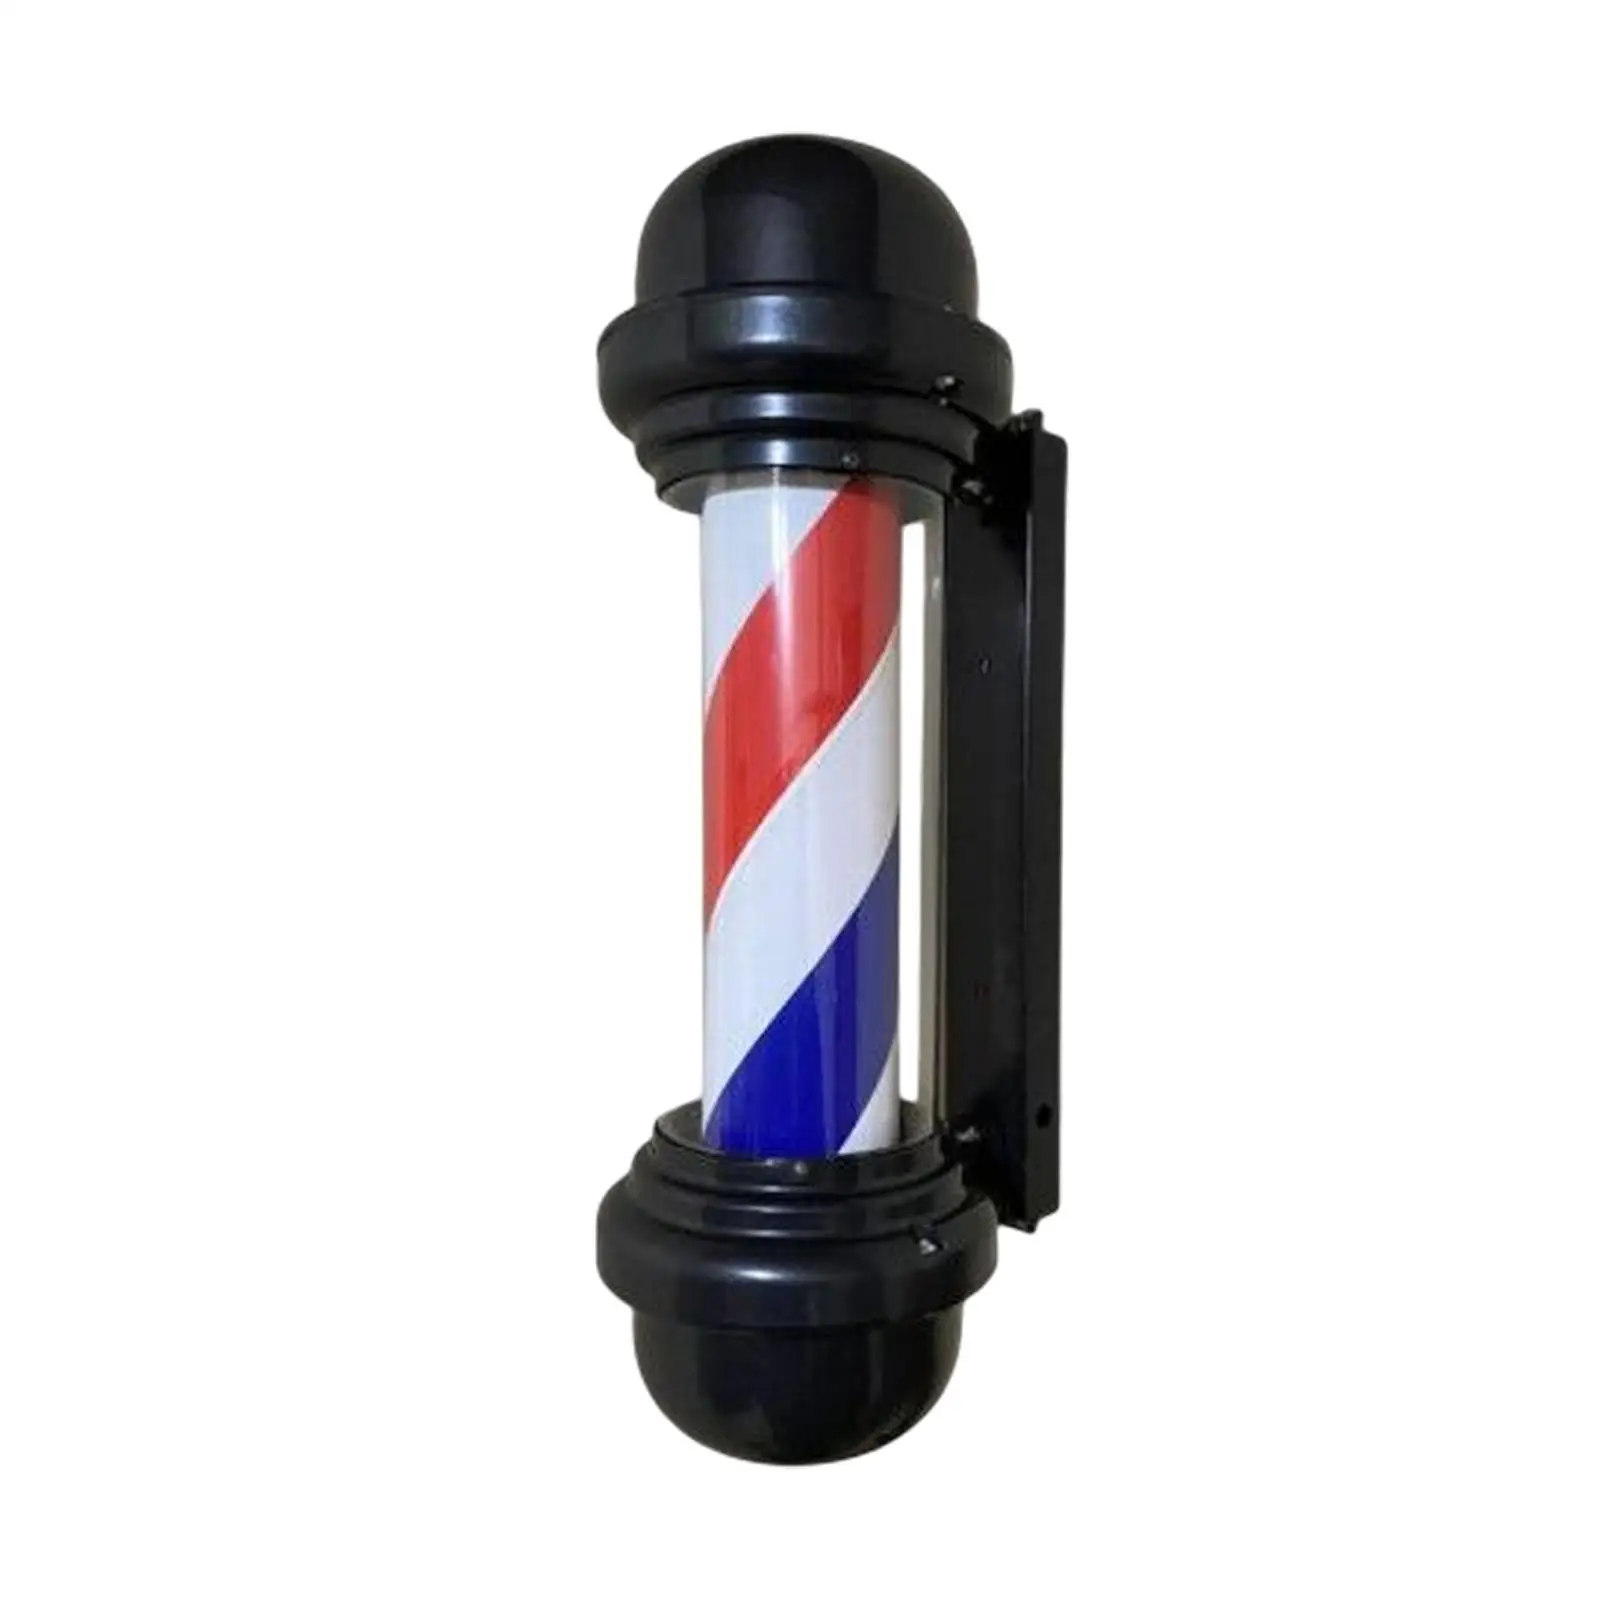 Barber Pole Light Rotating Sign Light Rainproof Hair Salon Stripes Wall Mounted Waterproof Retro Style LED for Indoor Entrance